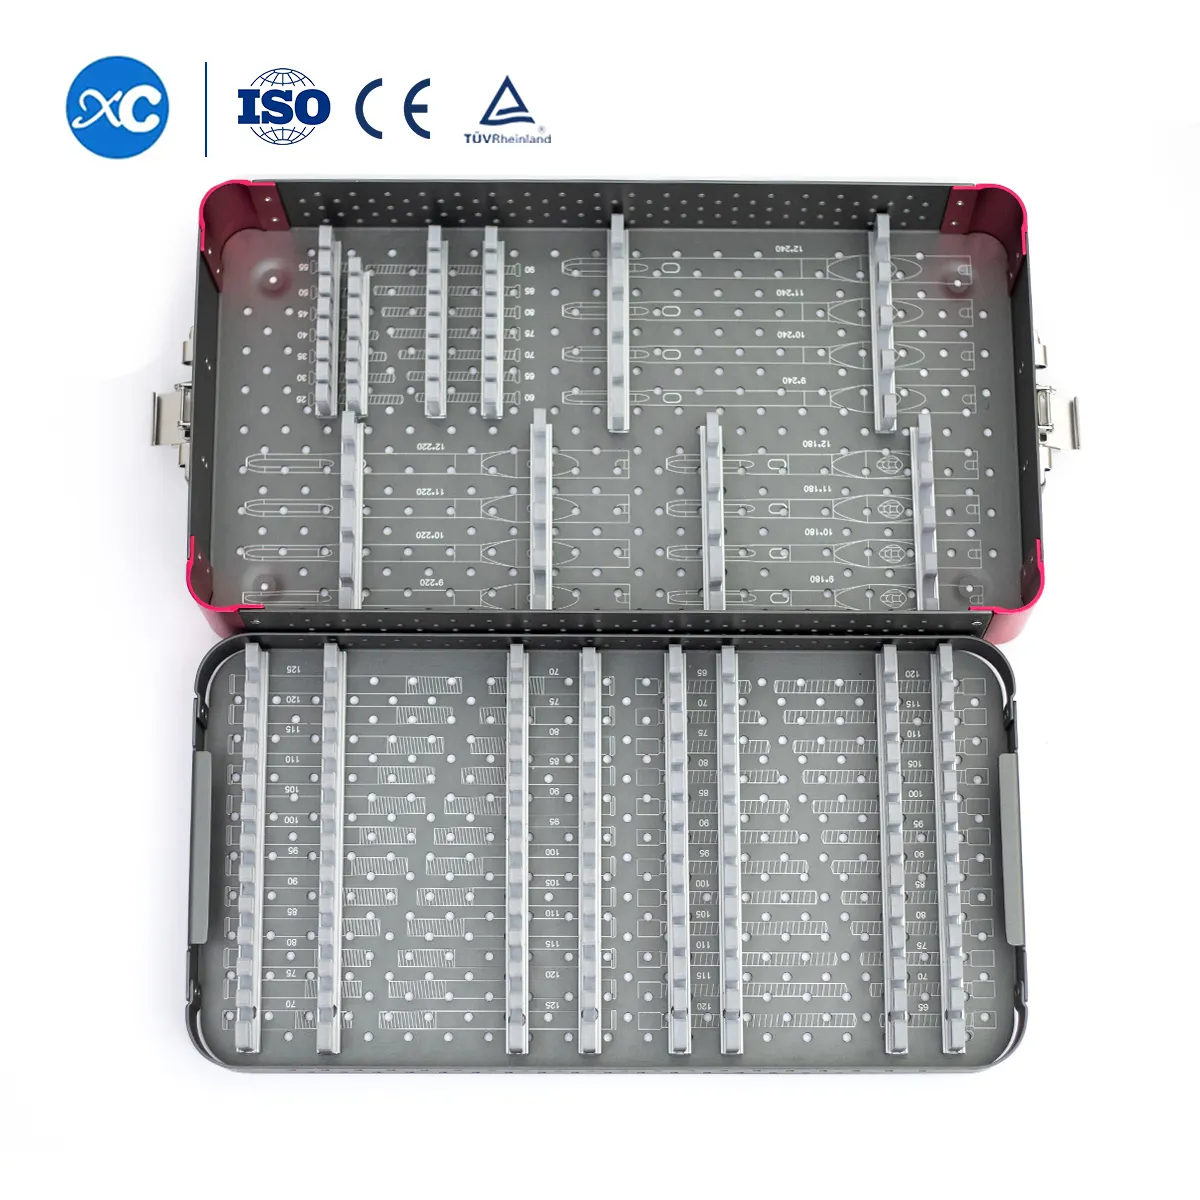 LOGO Customized Orthopaedic Implants PFNA Intramedullary Nails and Screws Sterilization Box / Container